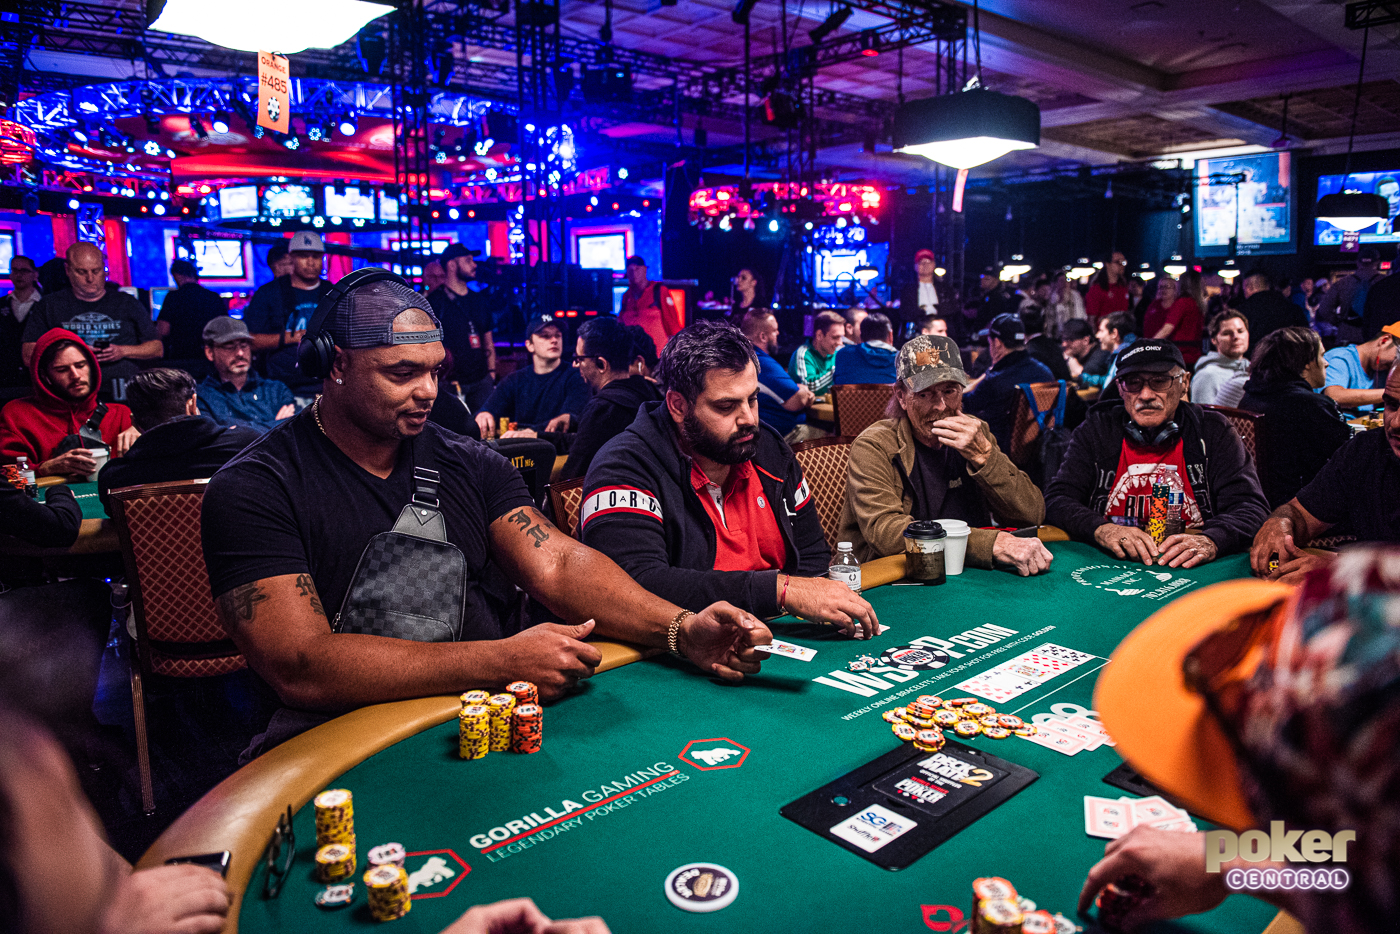 Richard Seymour in action during Day 4 of the WSOP Main Event.